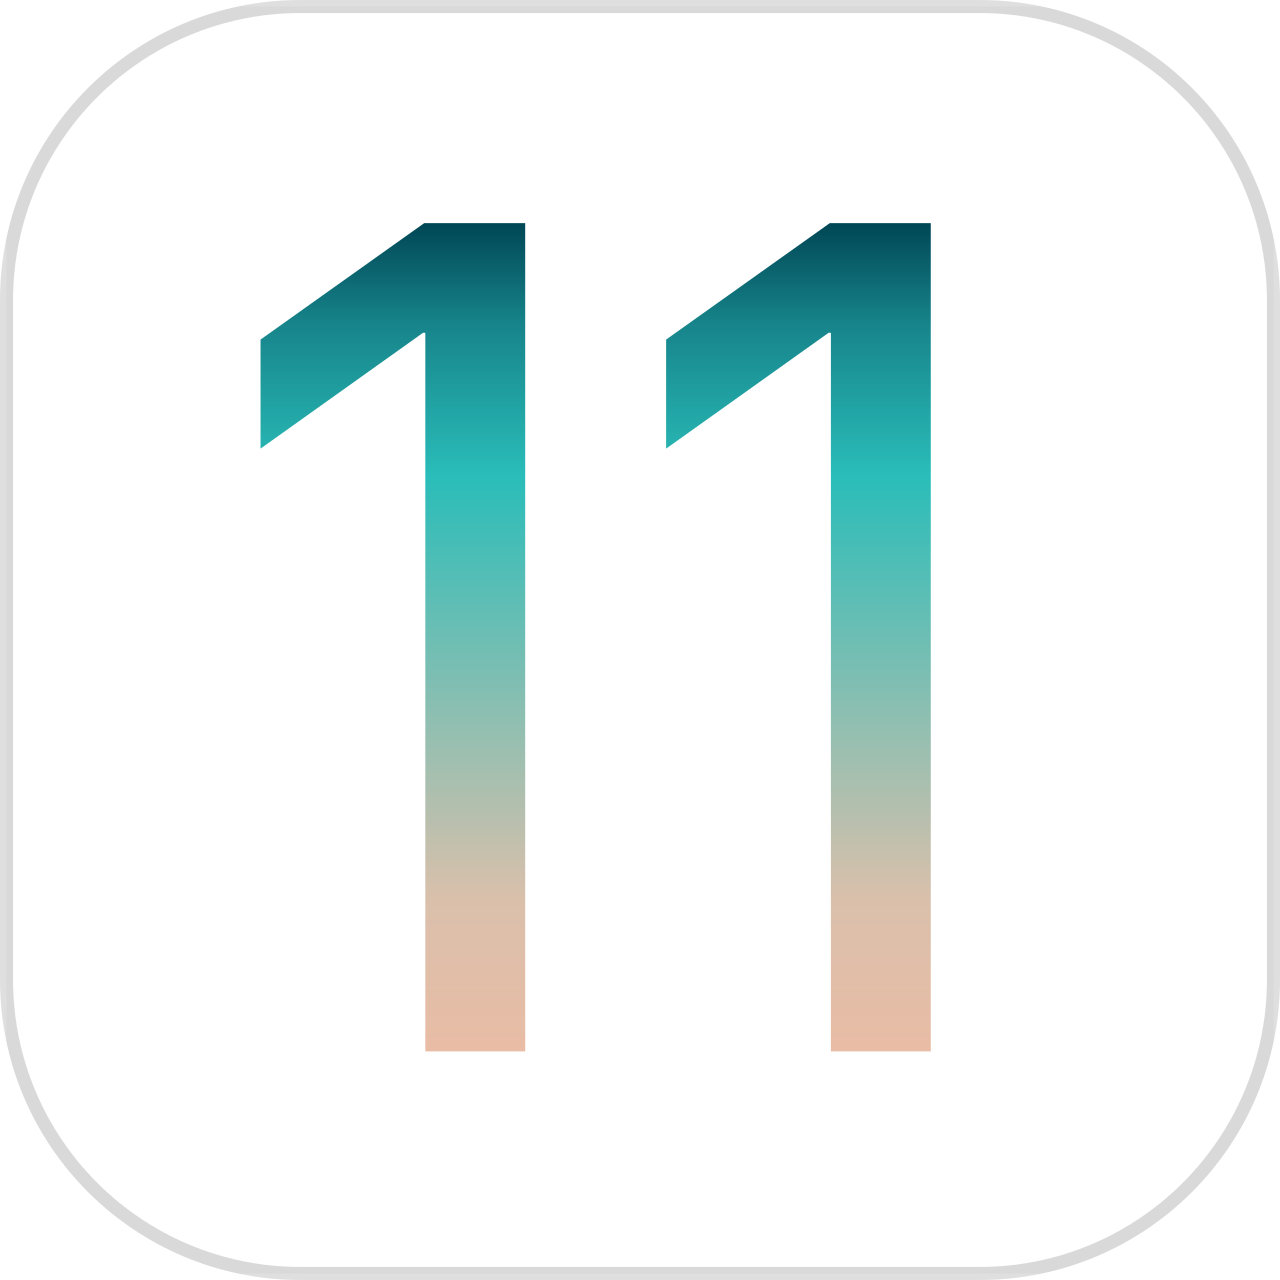 Top 12 iOS 10 Features We'd Like To See